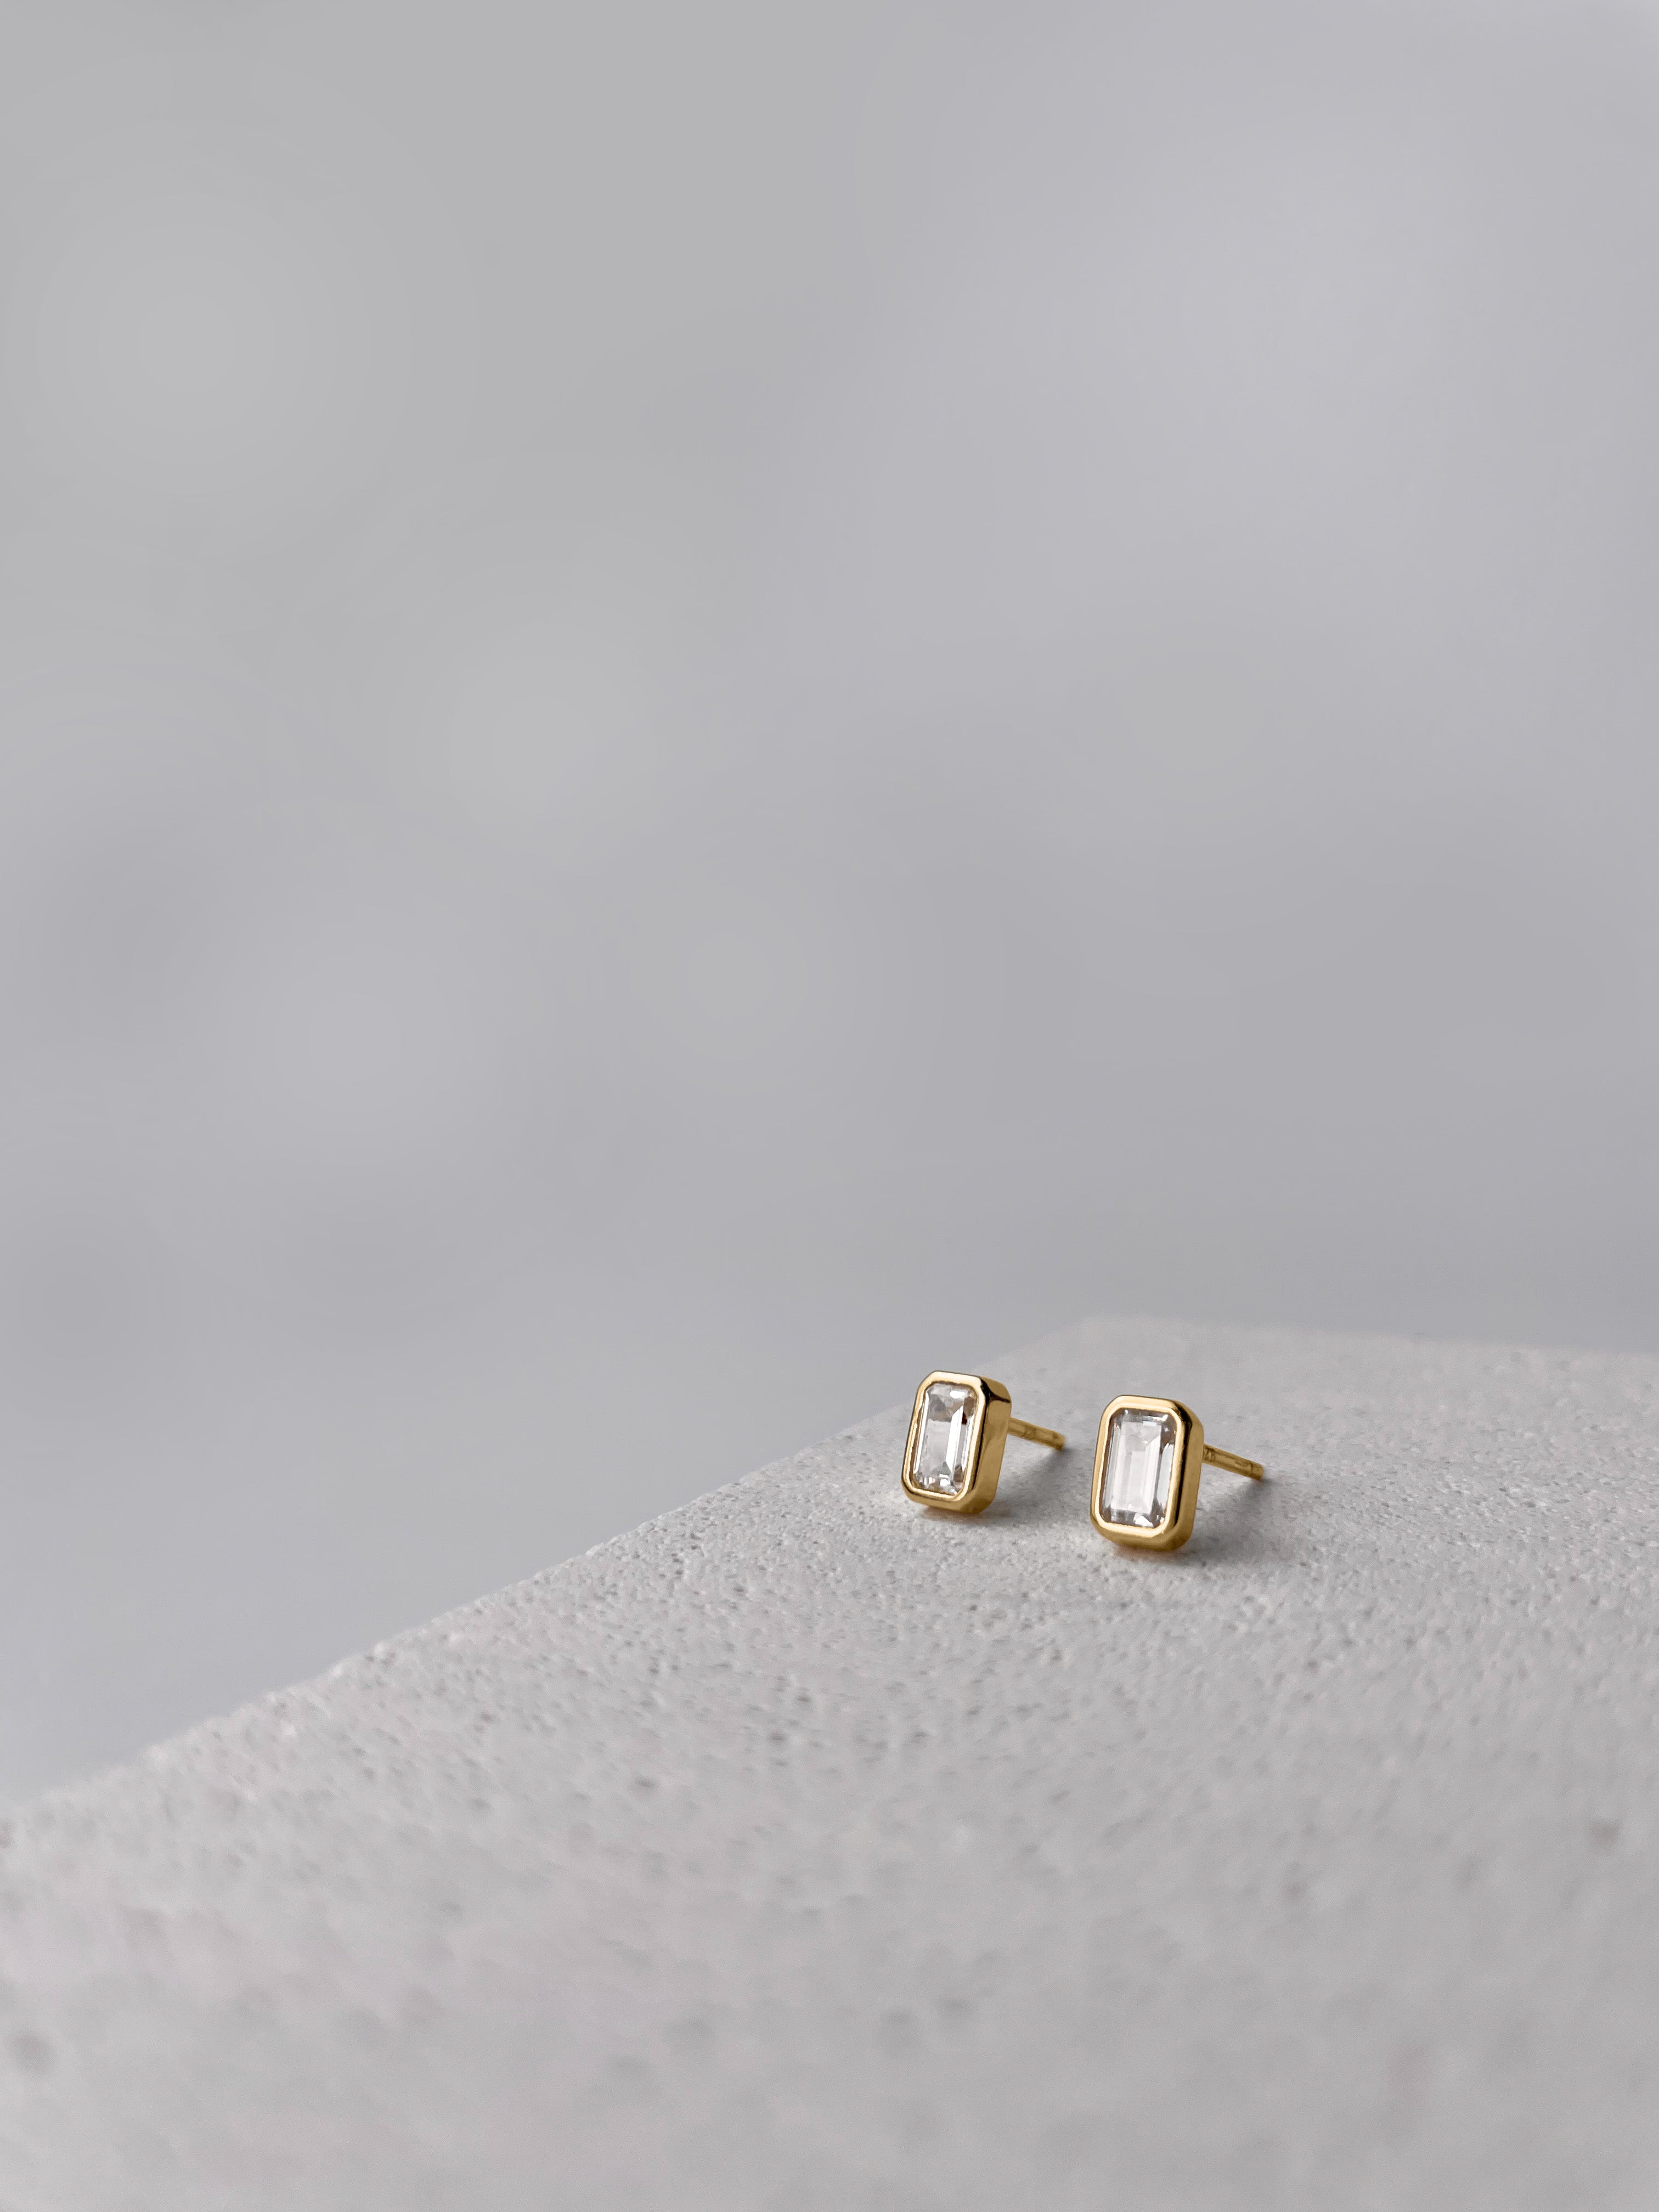 Tender Objects New Light Studs - Minimalist earrings with a chic design. Elevate your style with these modern and elegant studs.